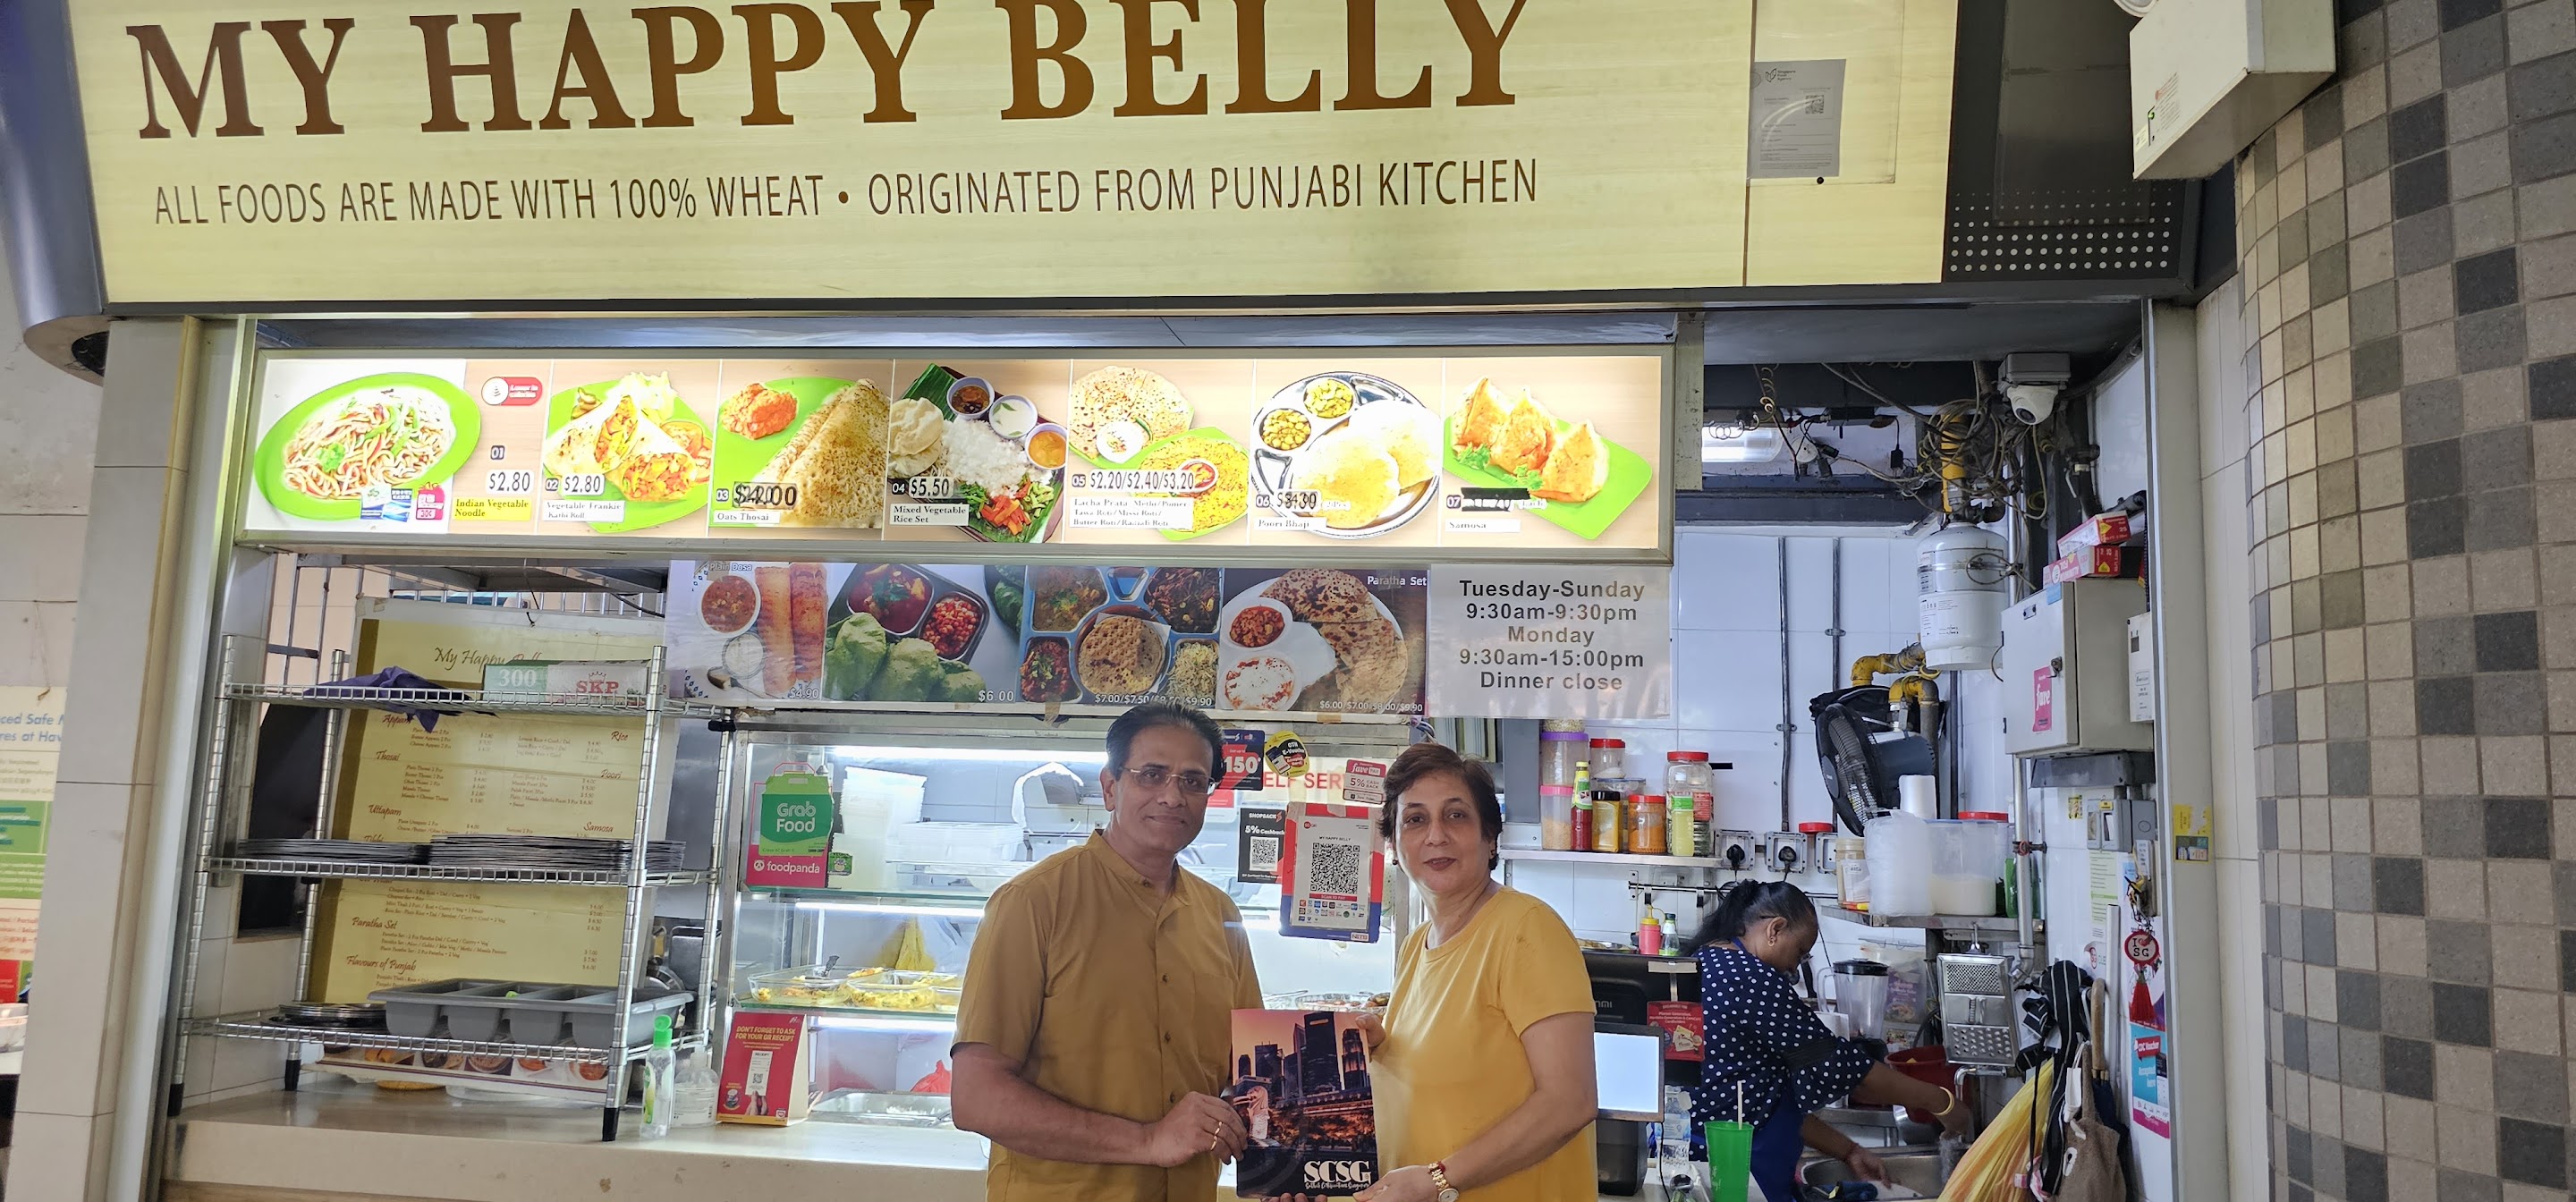 Venkat Kumar of Sattvik Certifications SG with Suman Sharma Owner of My Happy Belly